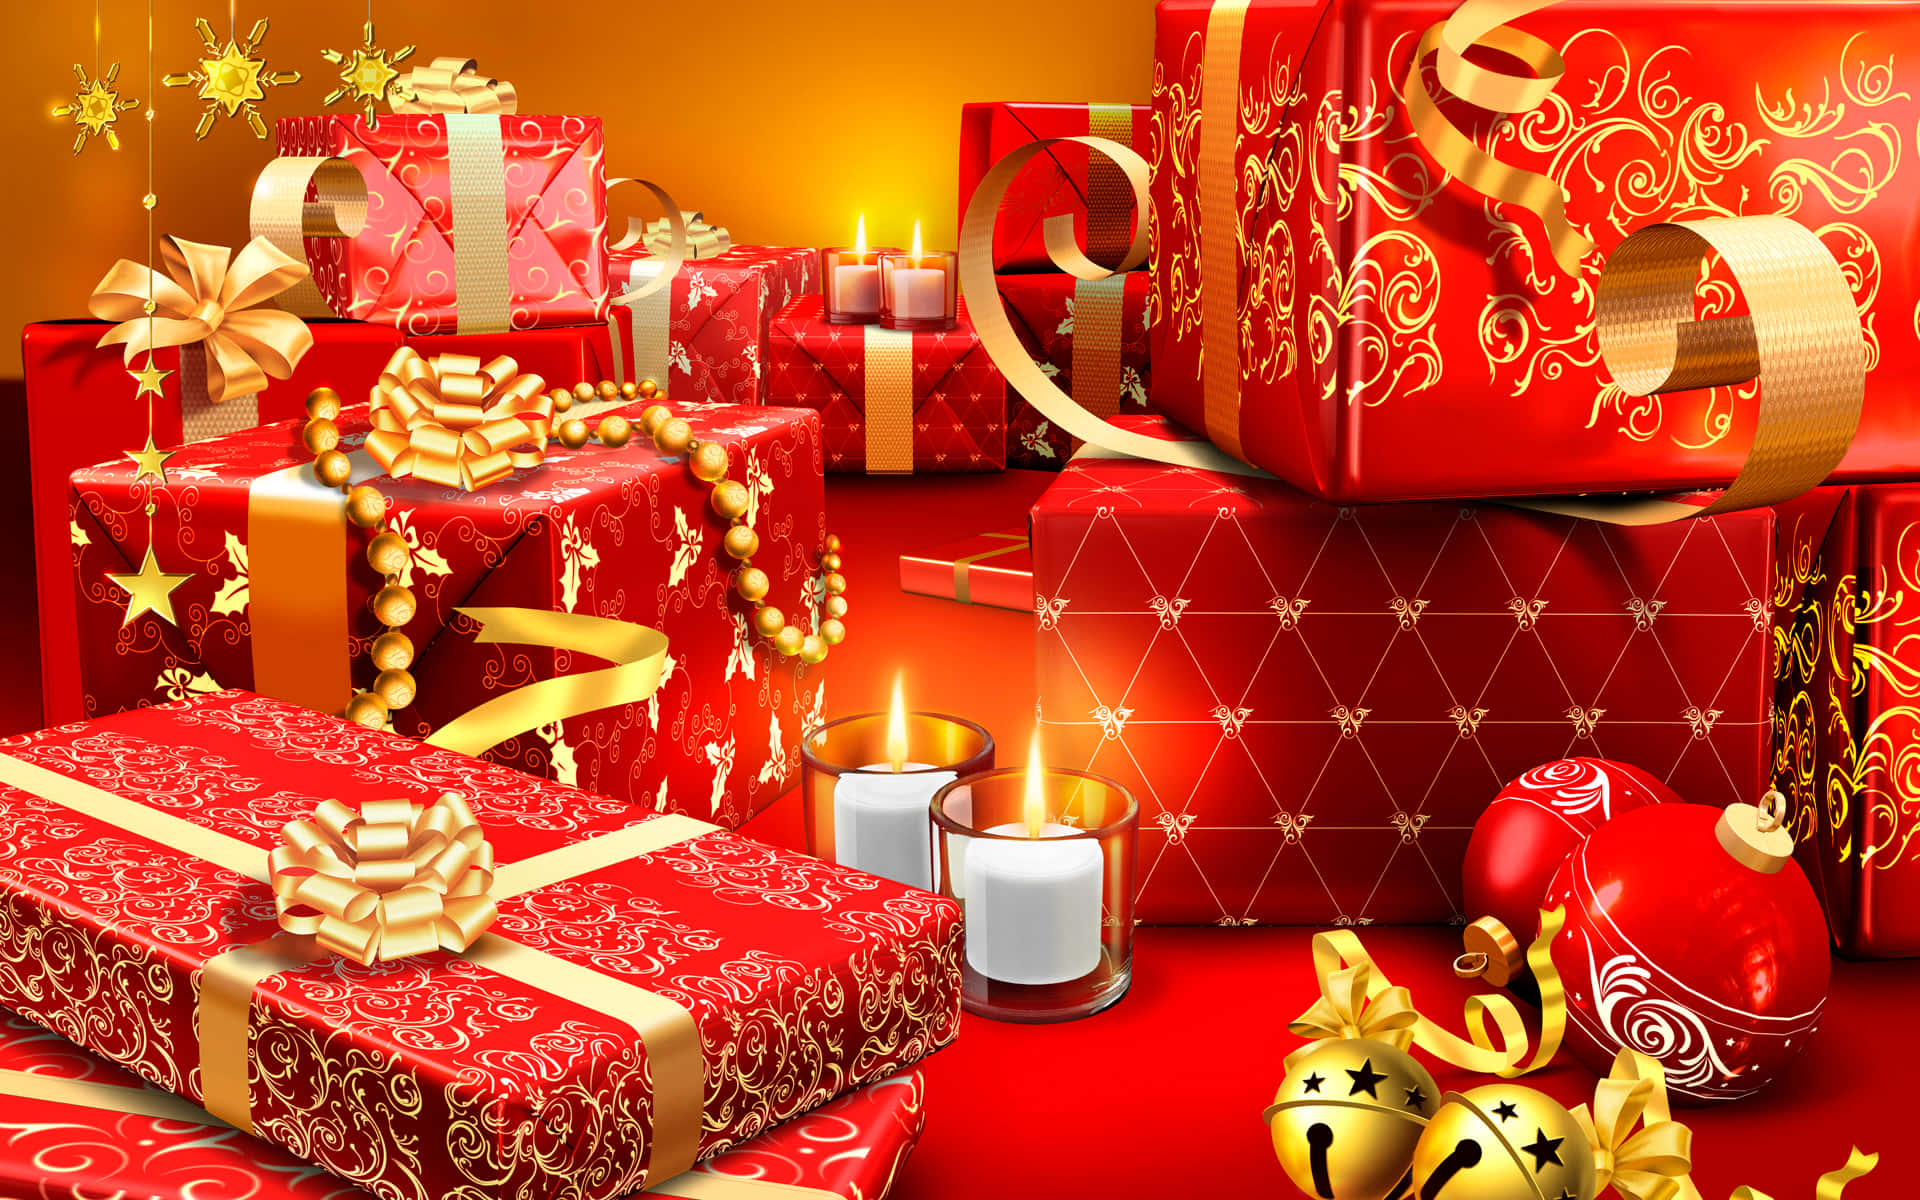 Digital Christmas Gifts With Candles Picture